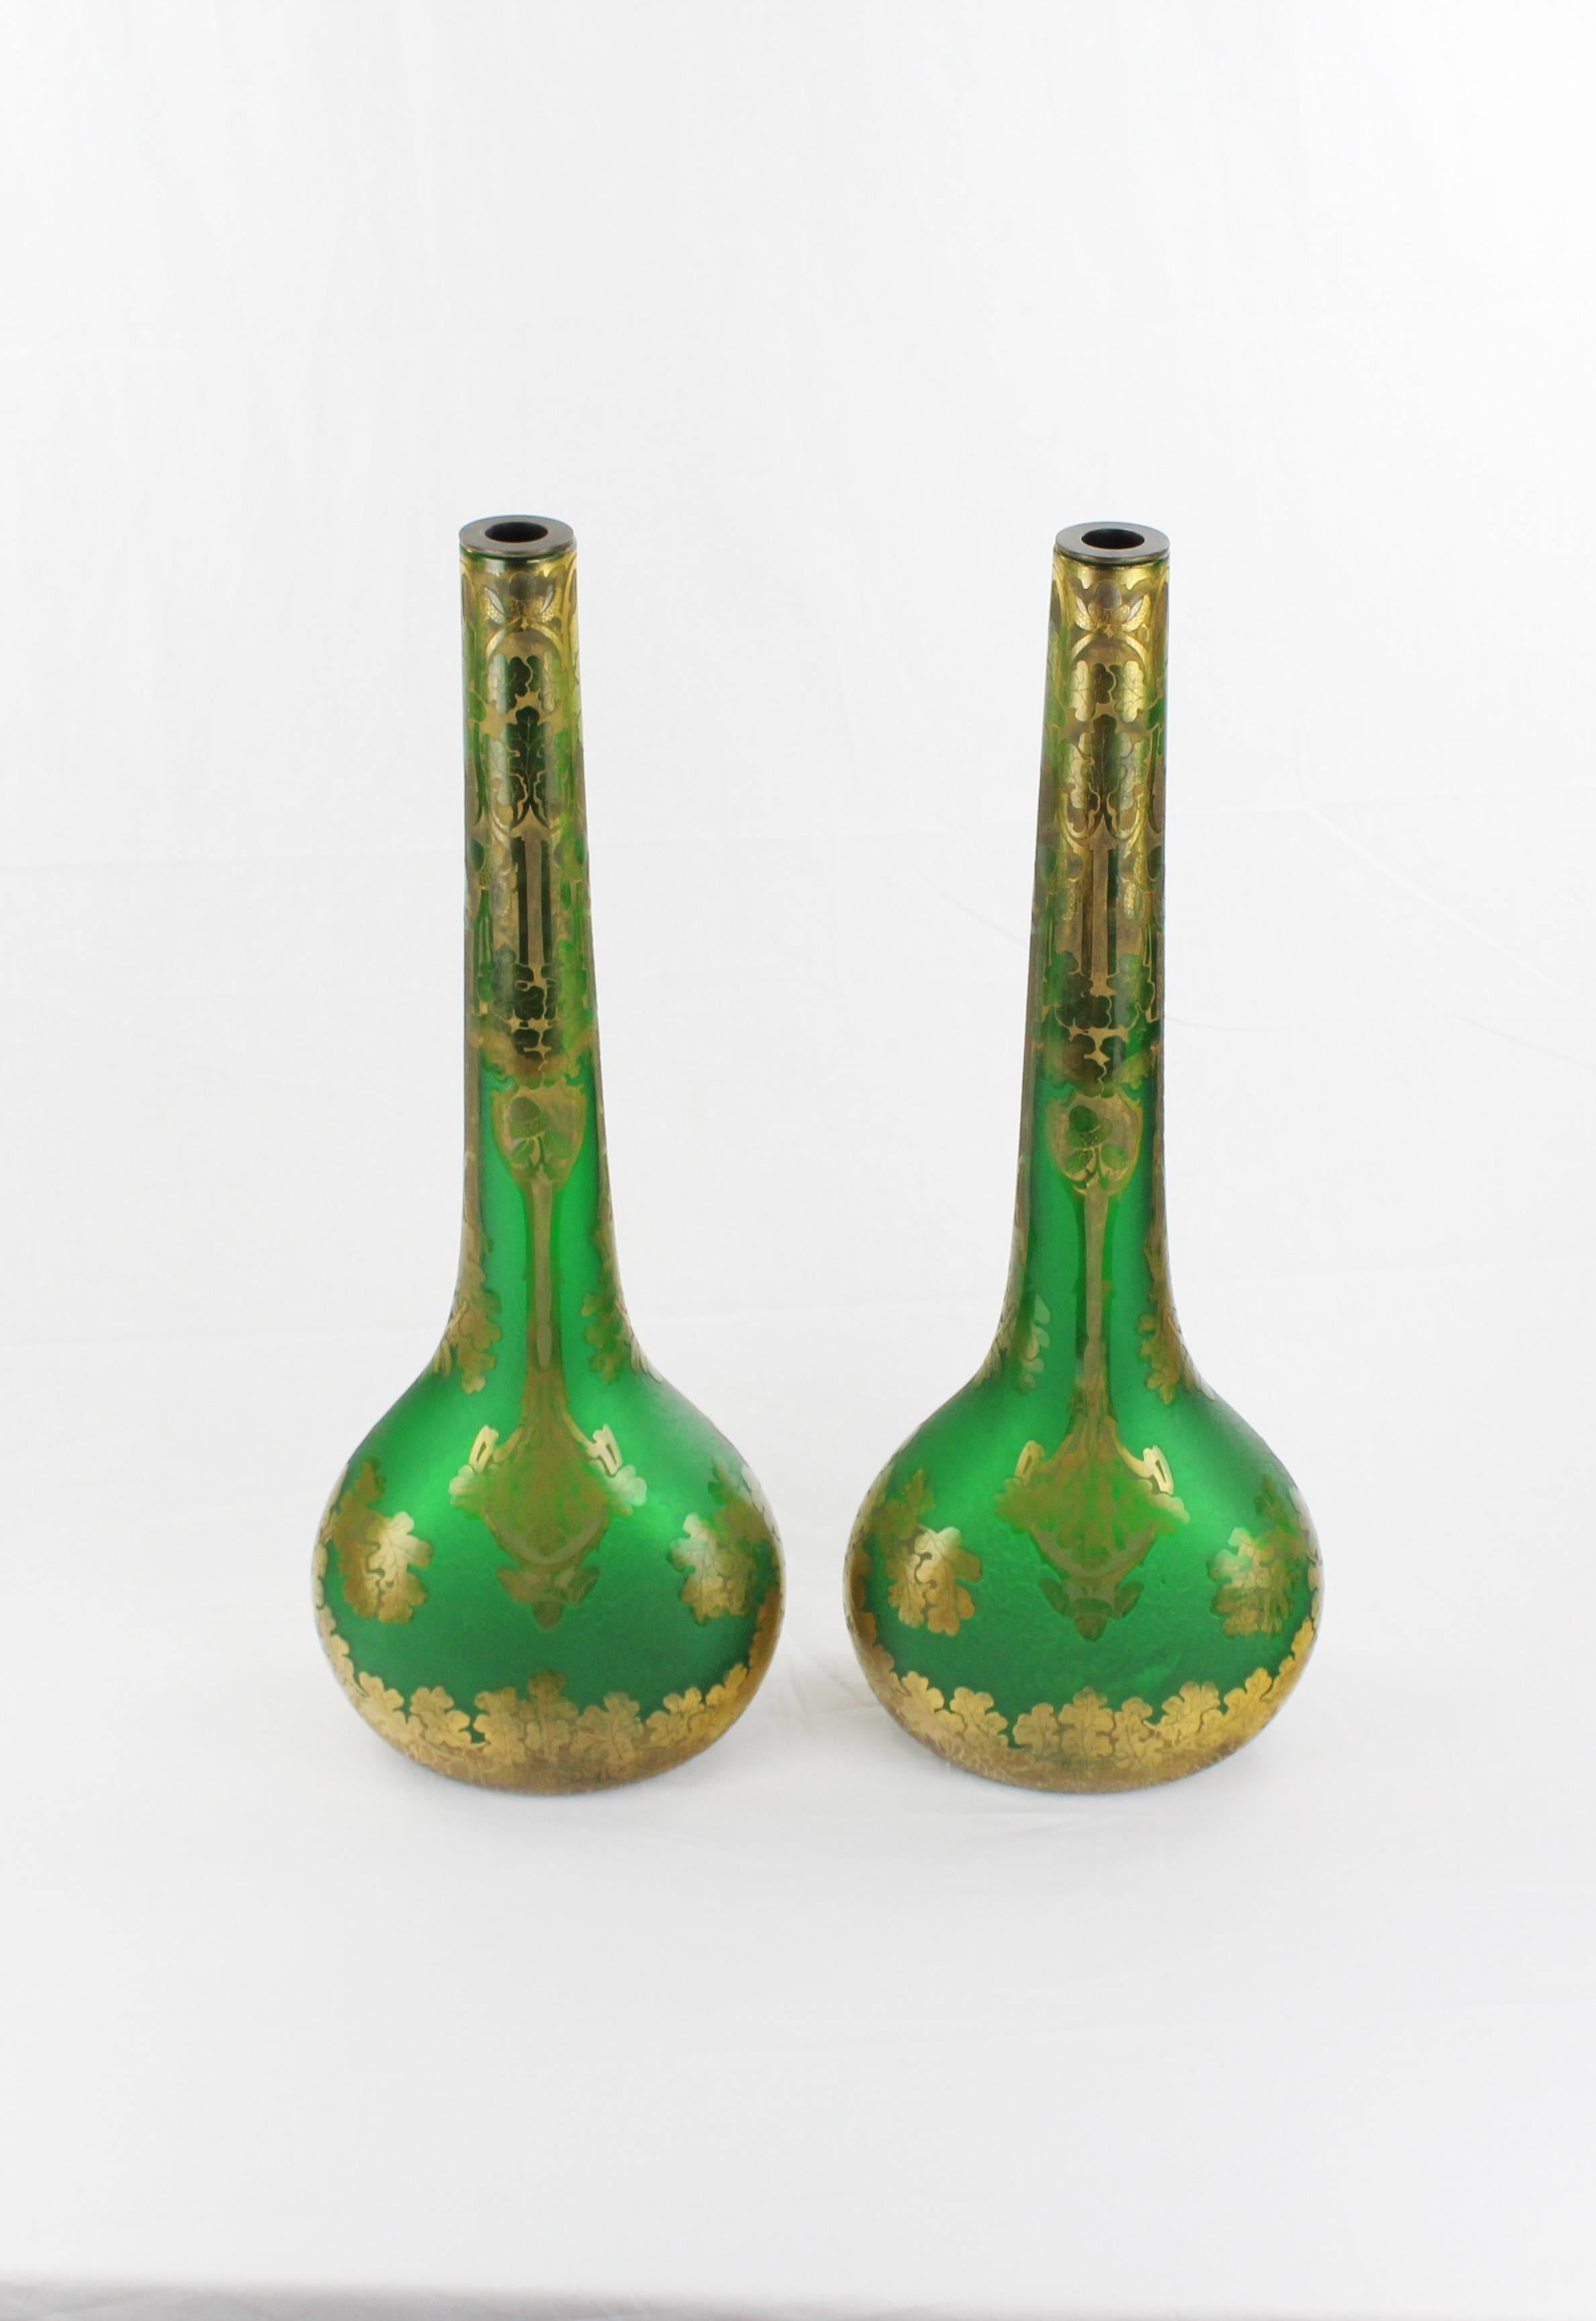 French Pair of Rare Vases 